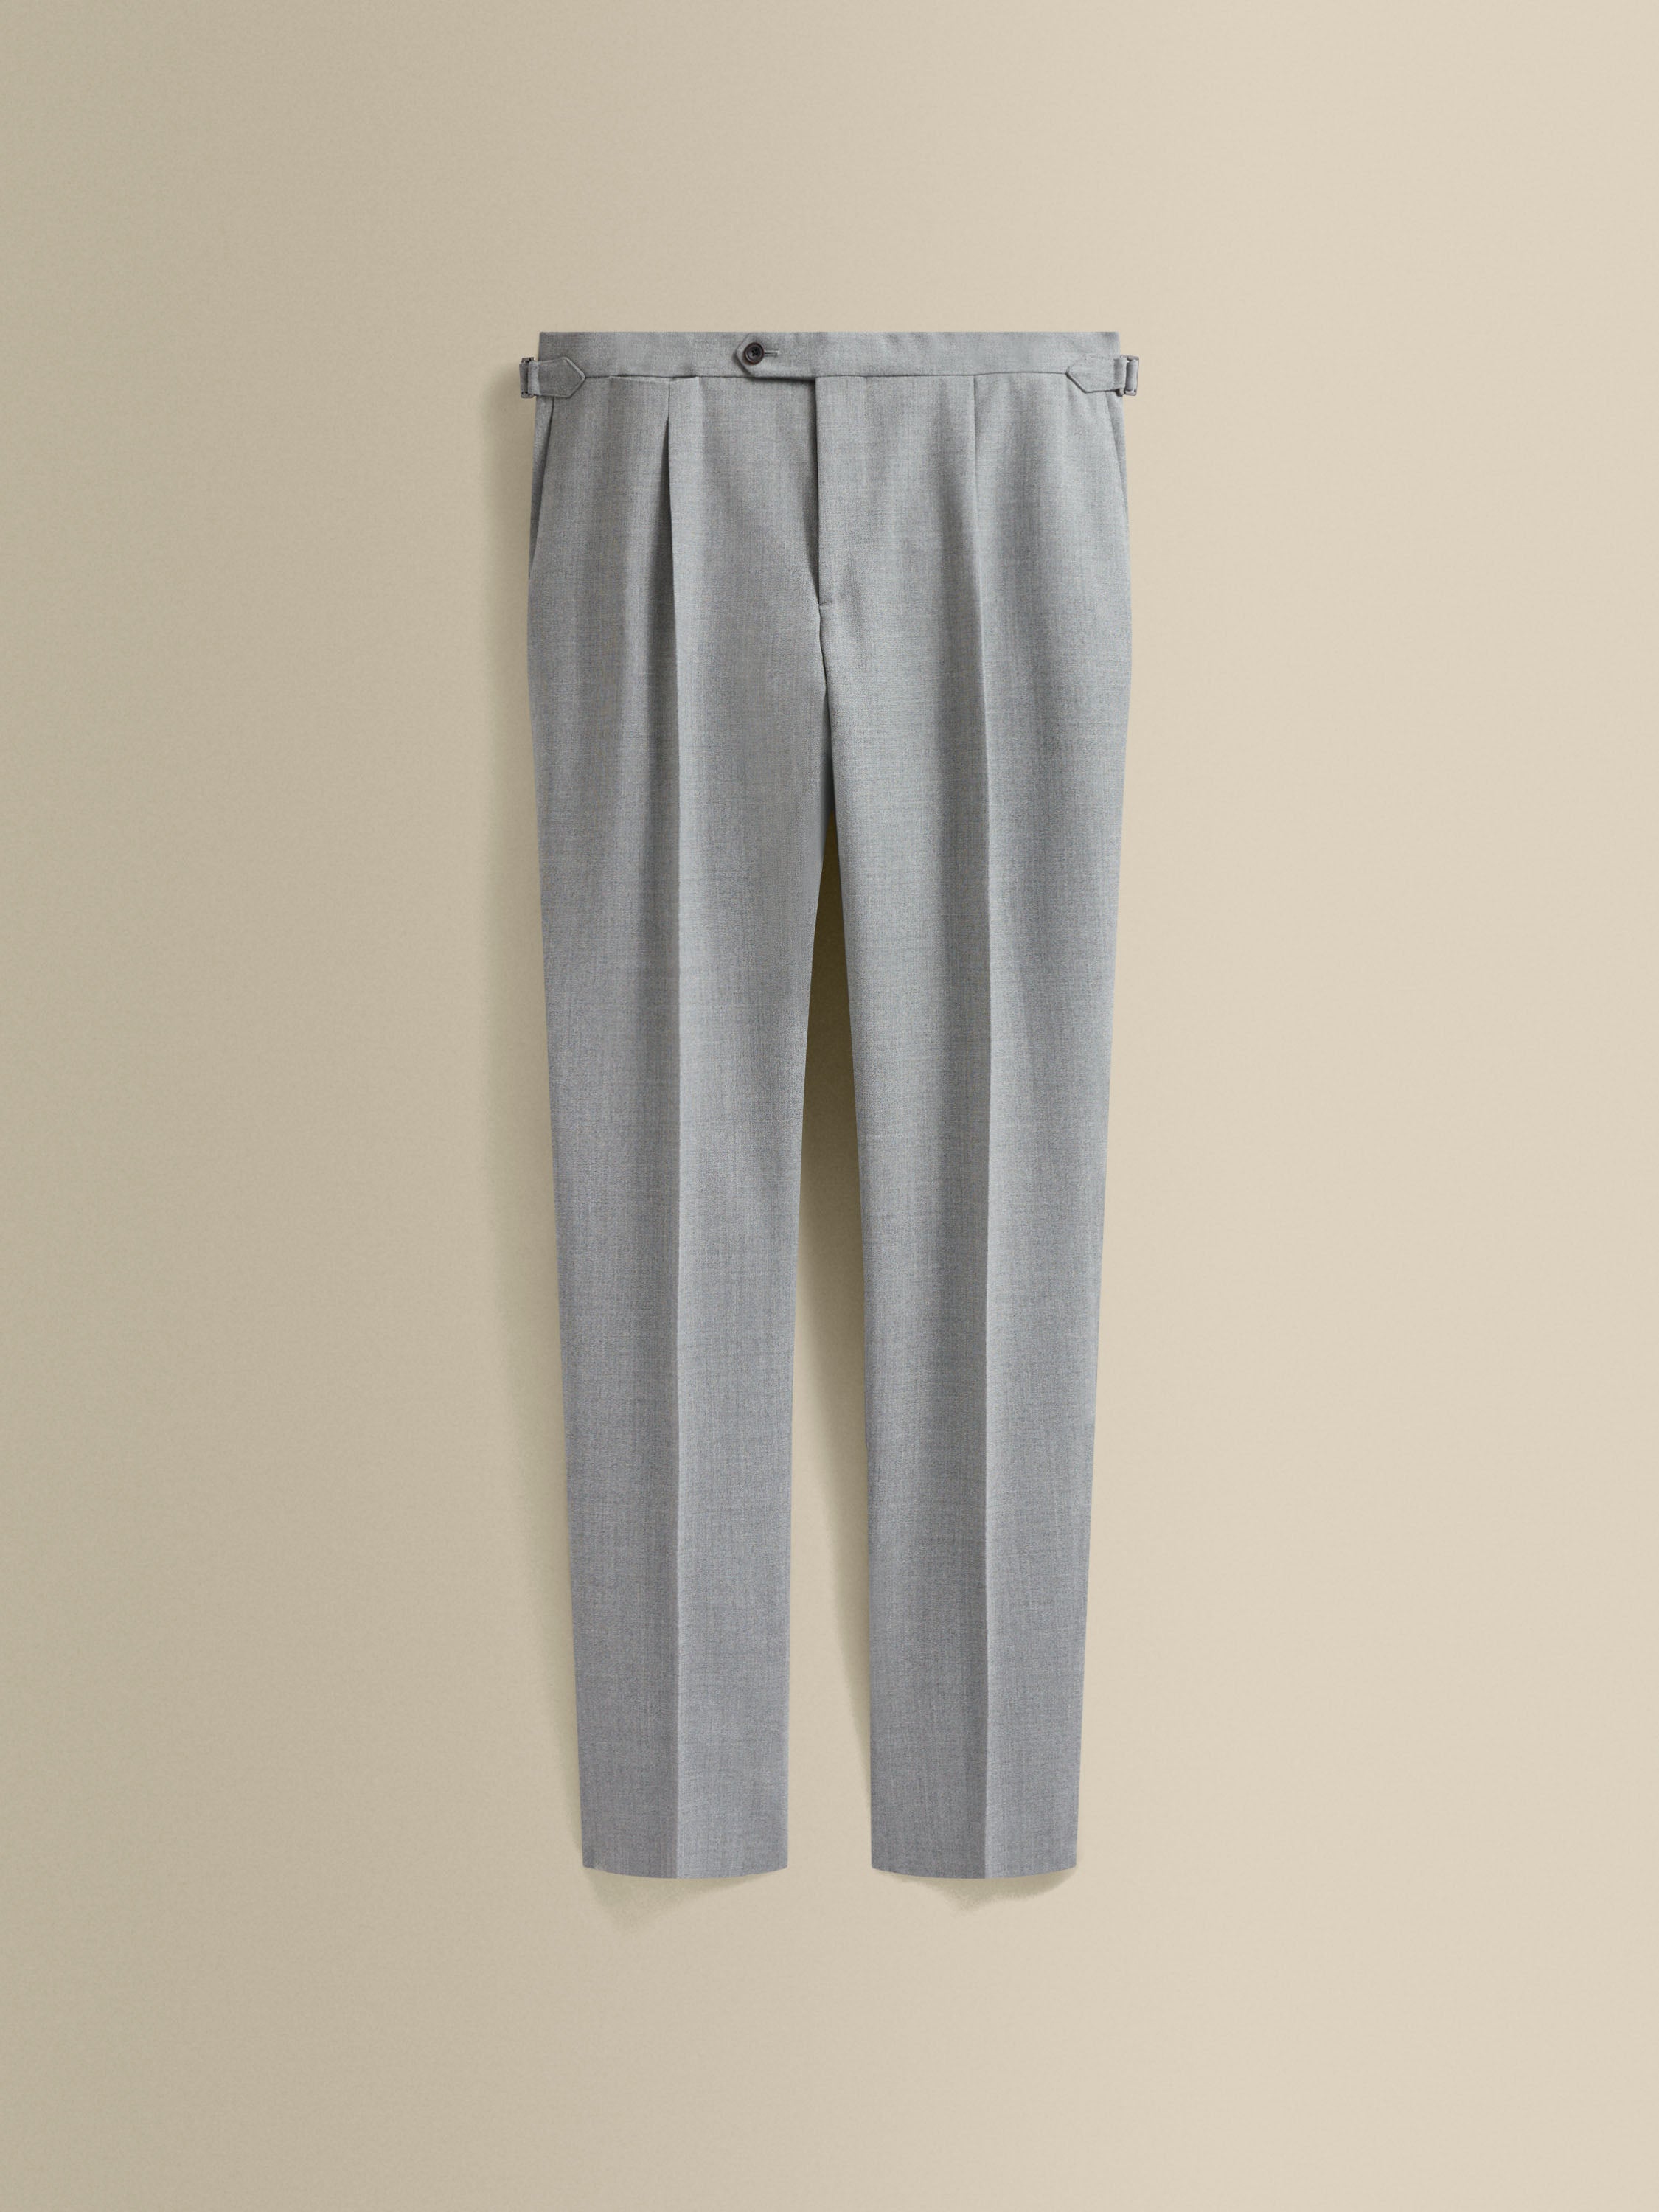 Wool Single Pleat Tailored Trousers Charcoal Grey Product Image